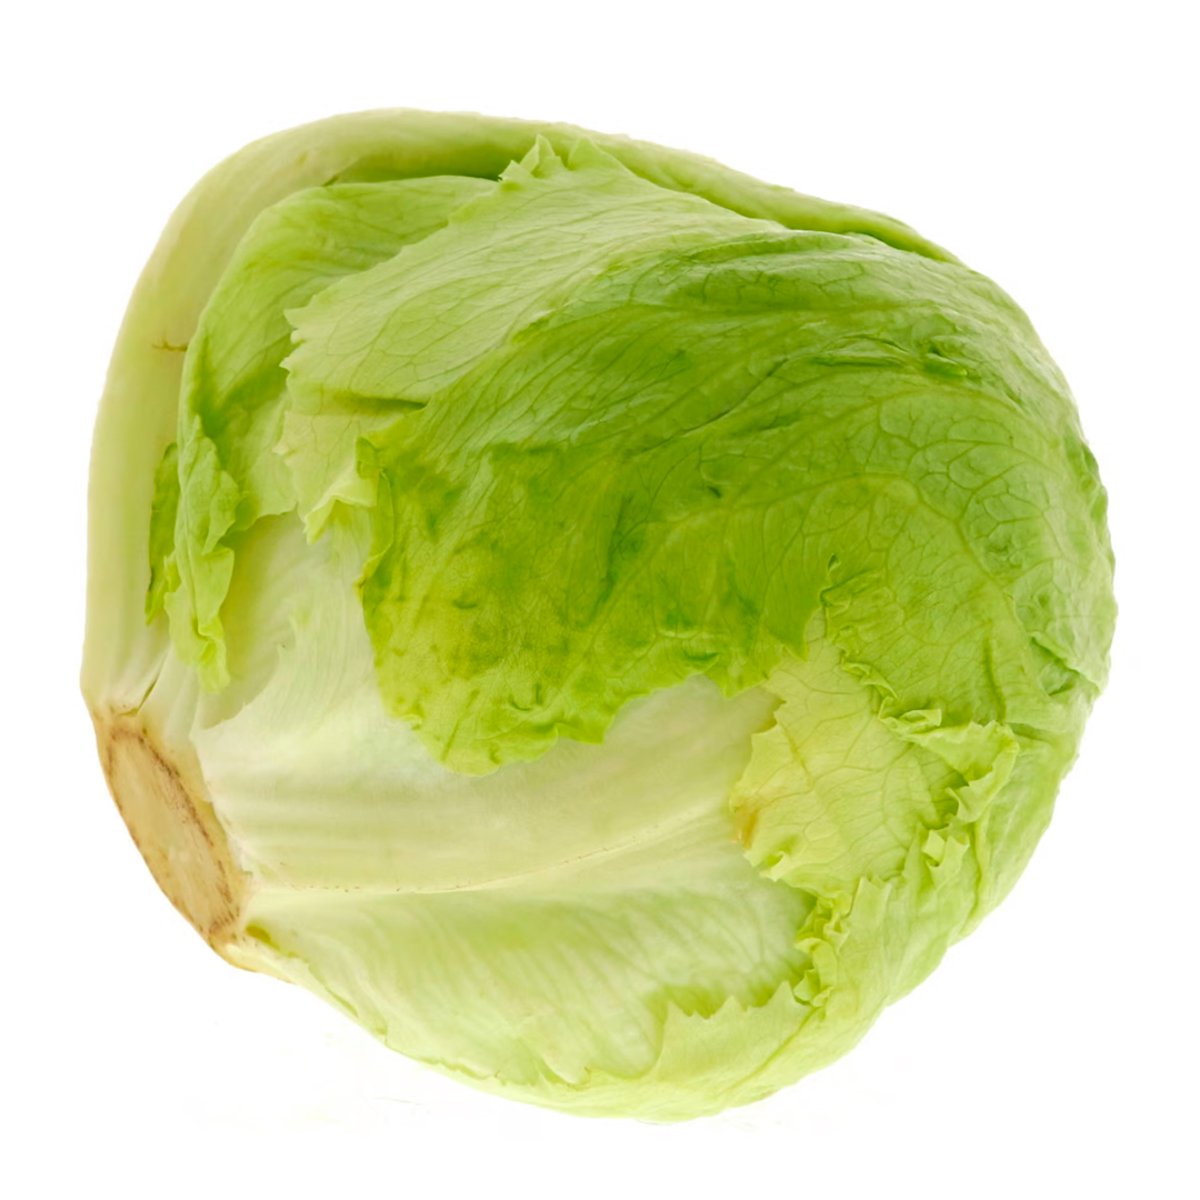 Cameron Round Lettuce 500g Approx Weight